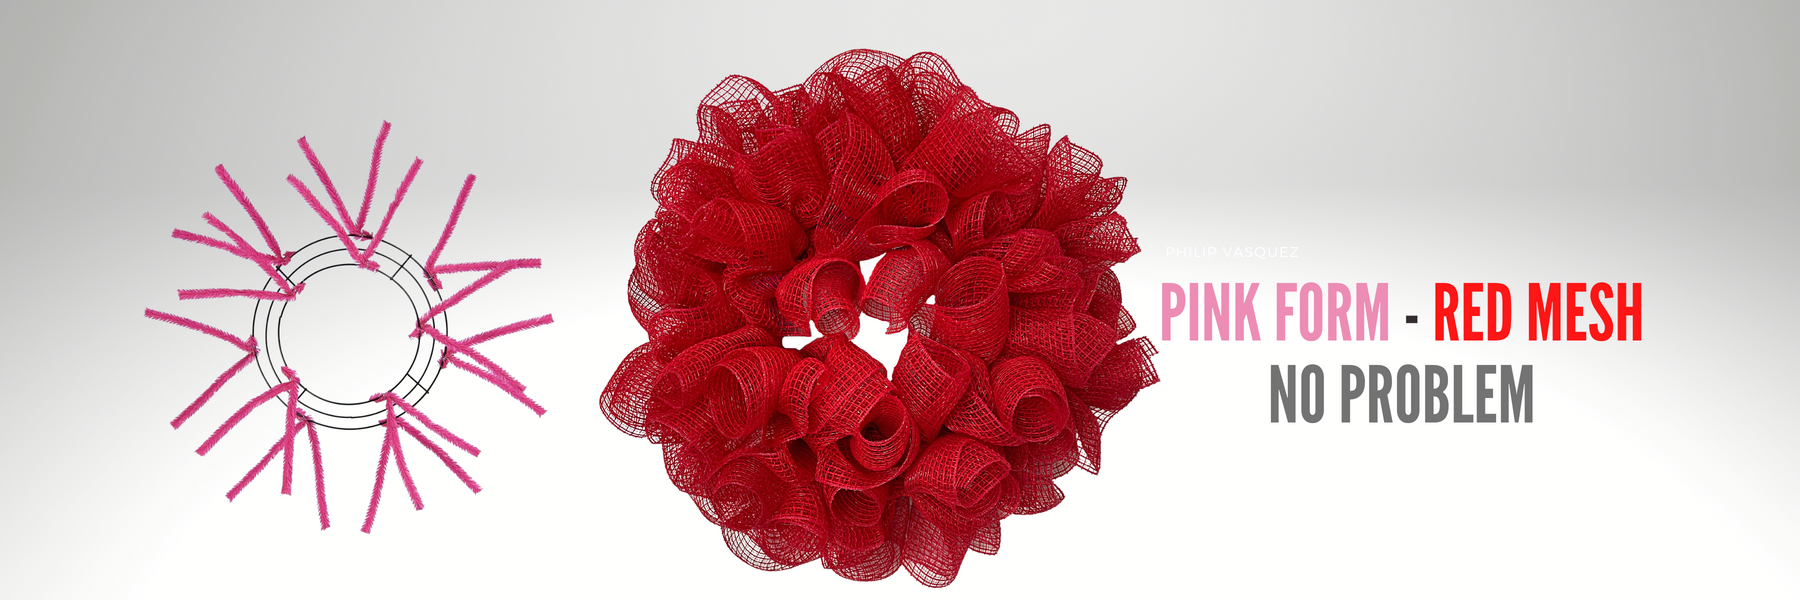 How to Use a Wreath Form that Doesn't Match Your Mesh